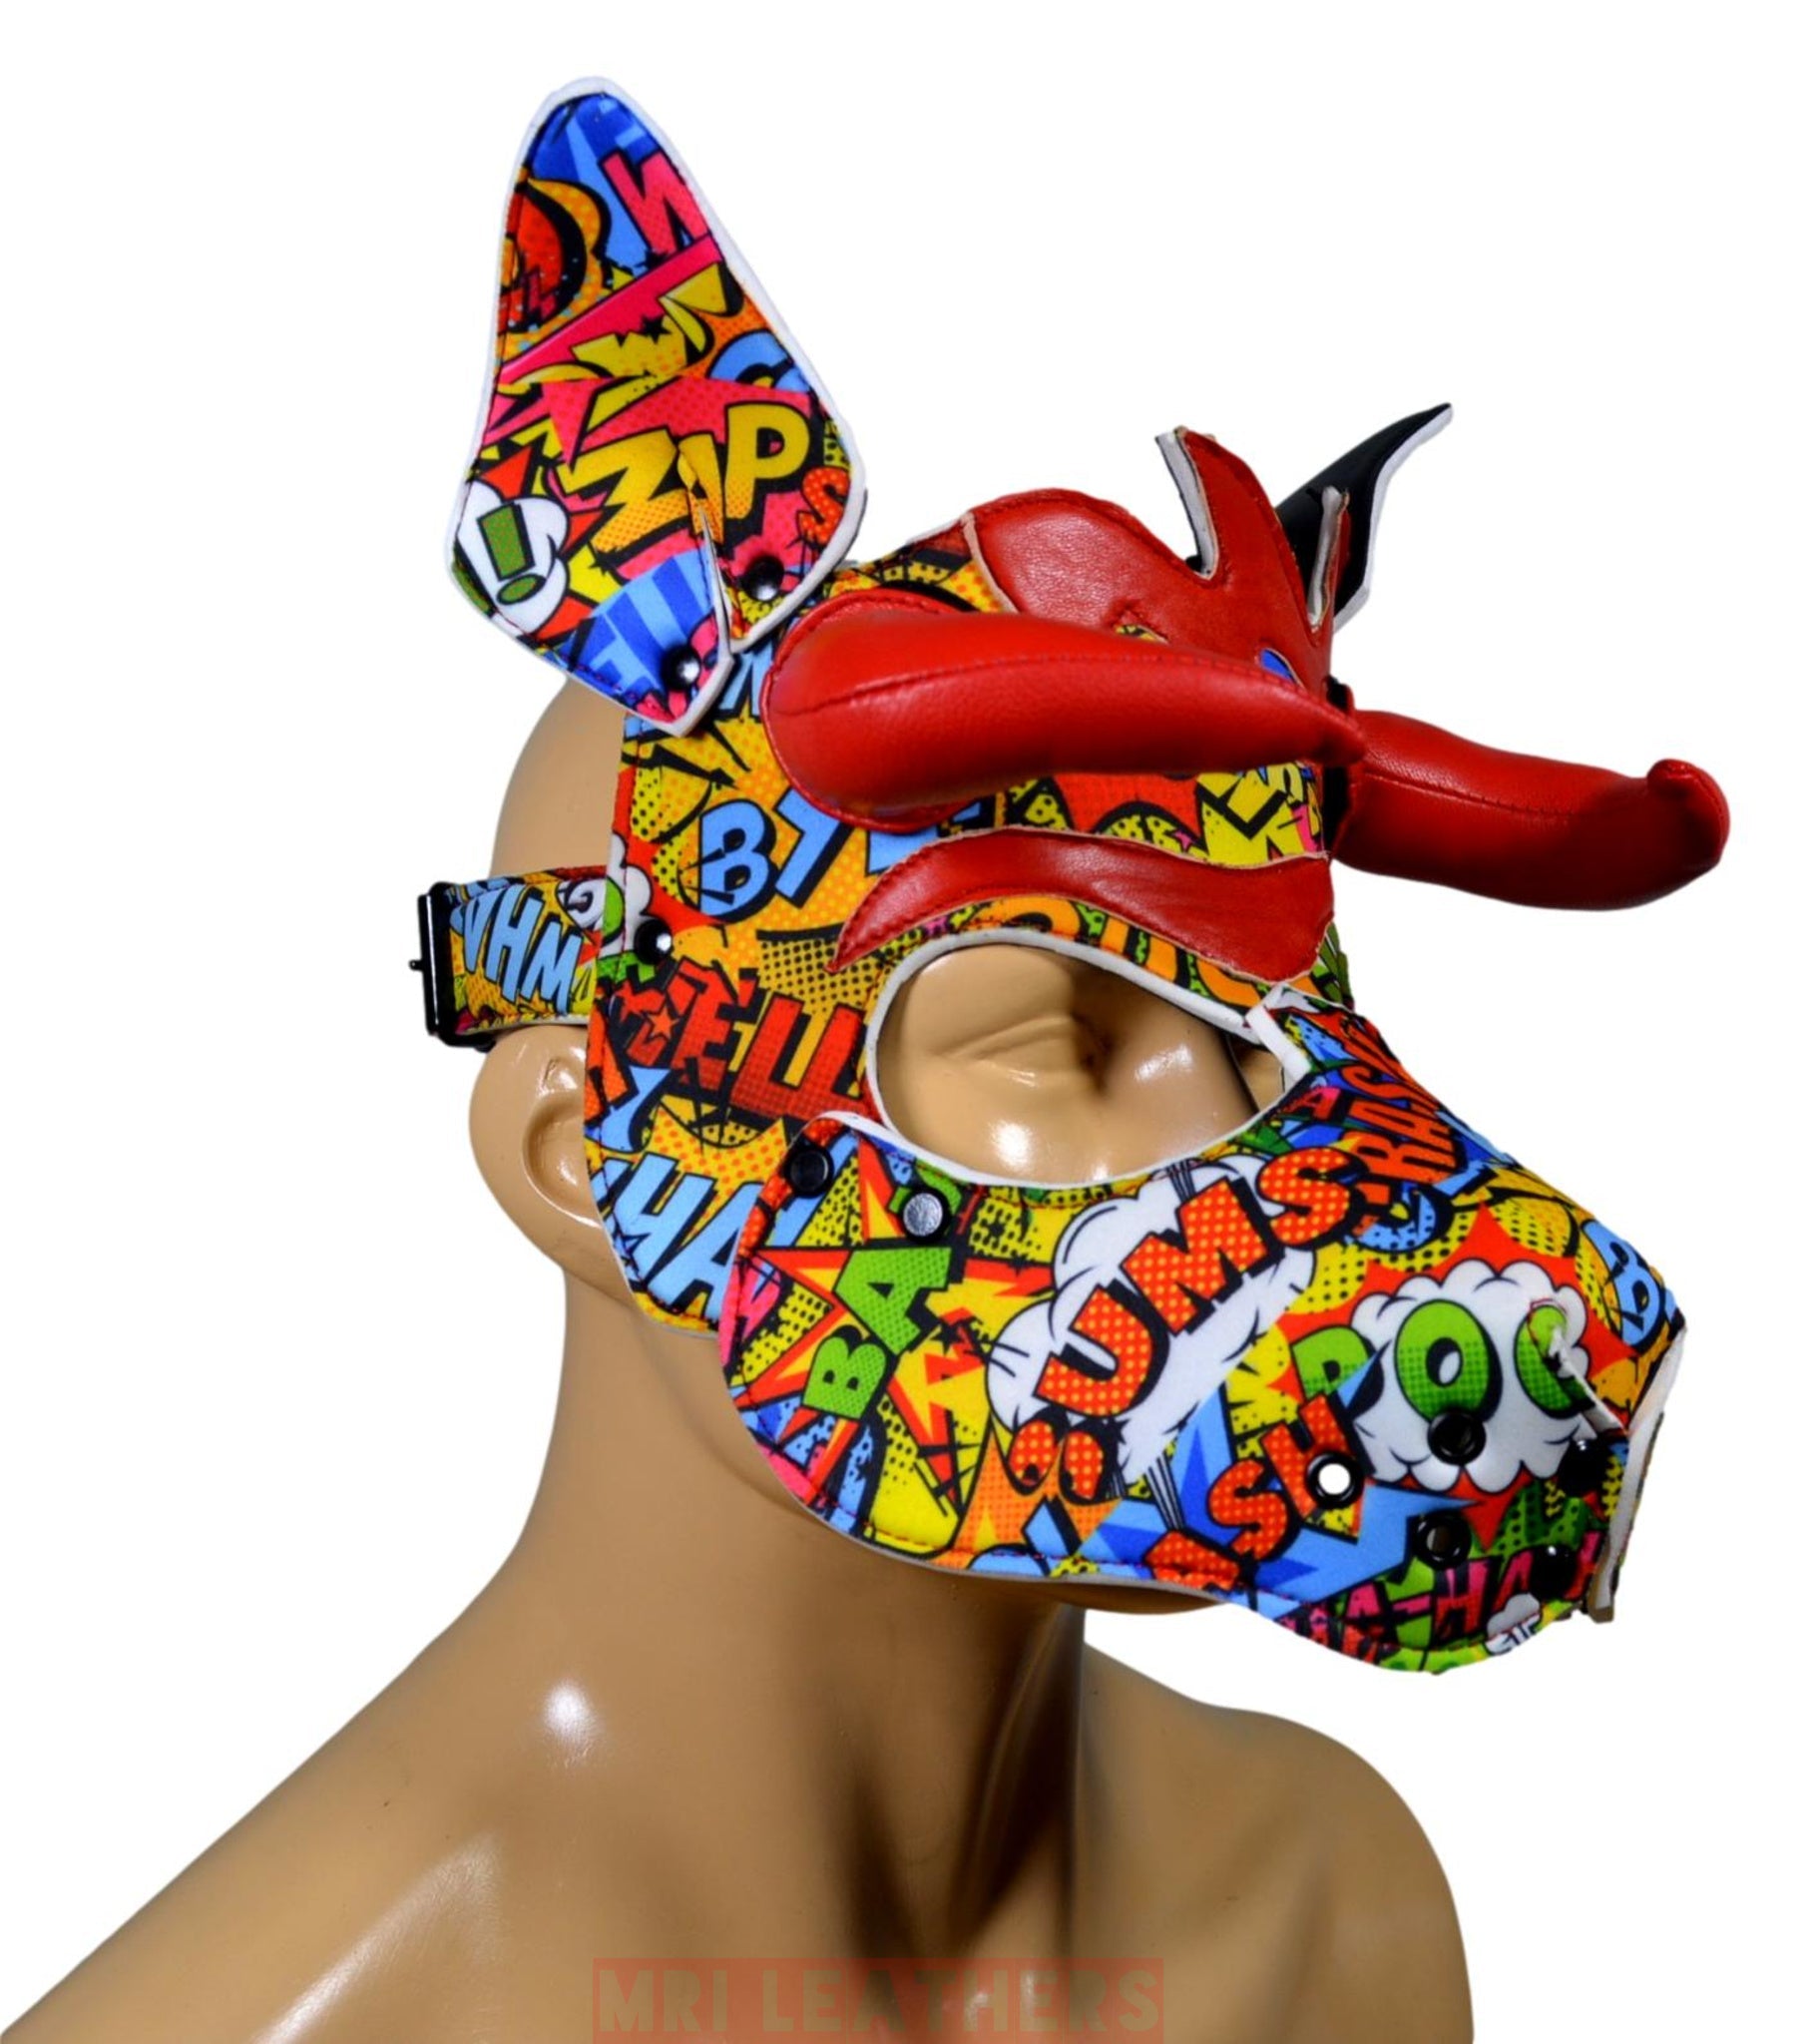 Leather neoprene Dog Mask Leather Pup Mask Dog Hood Pet Play Hood with horns - MRI Leathers